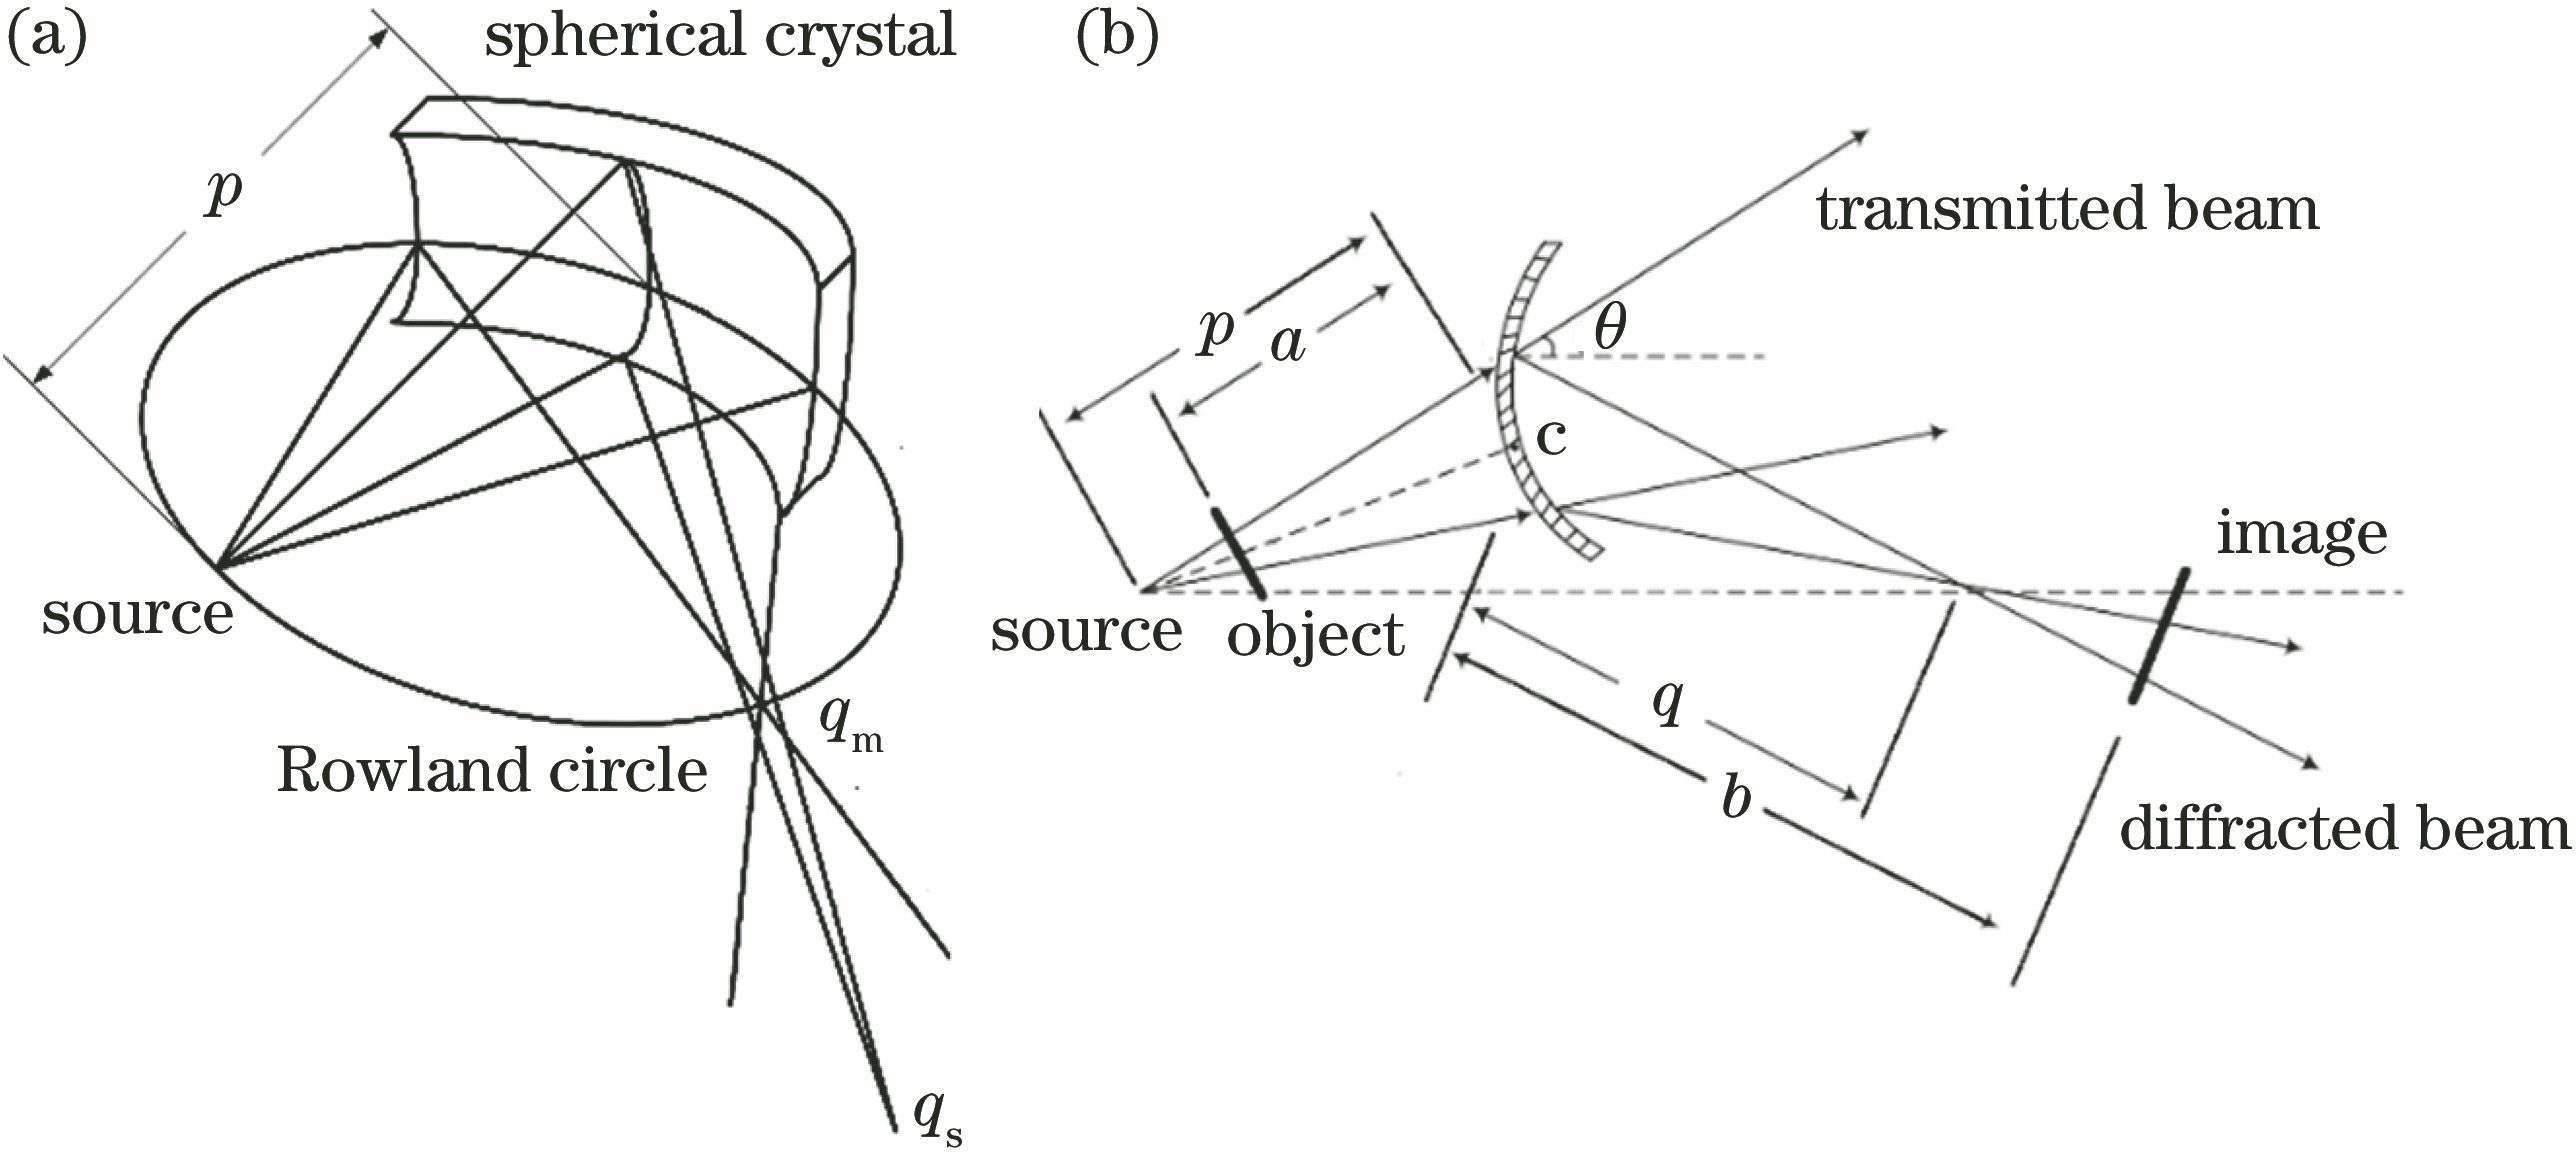 Imaging optical path of spherical crystal. (a) Reflection imaging; (b) transmission imaging